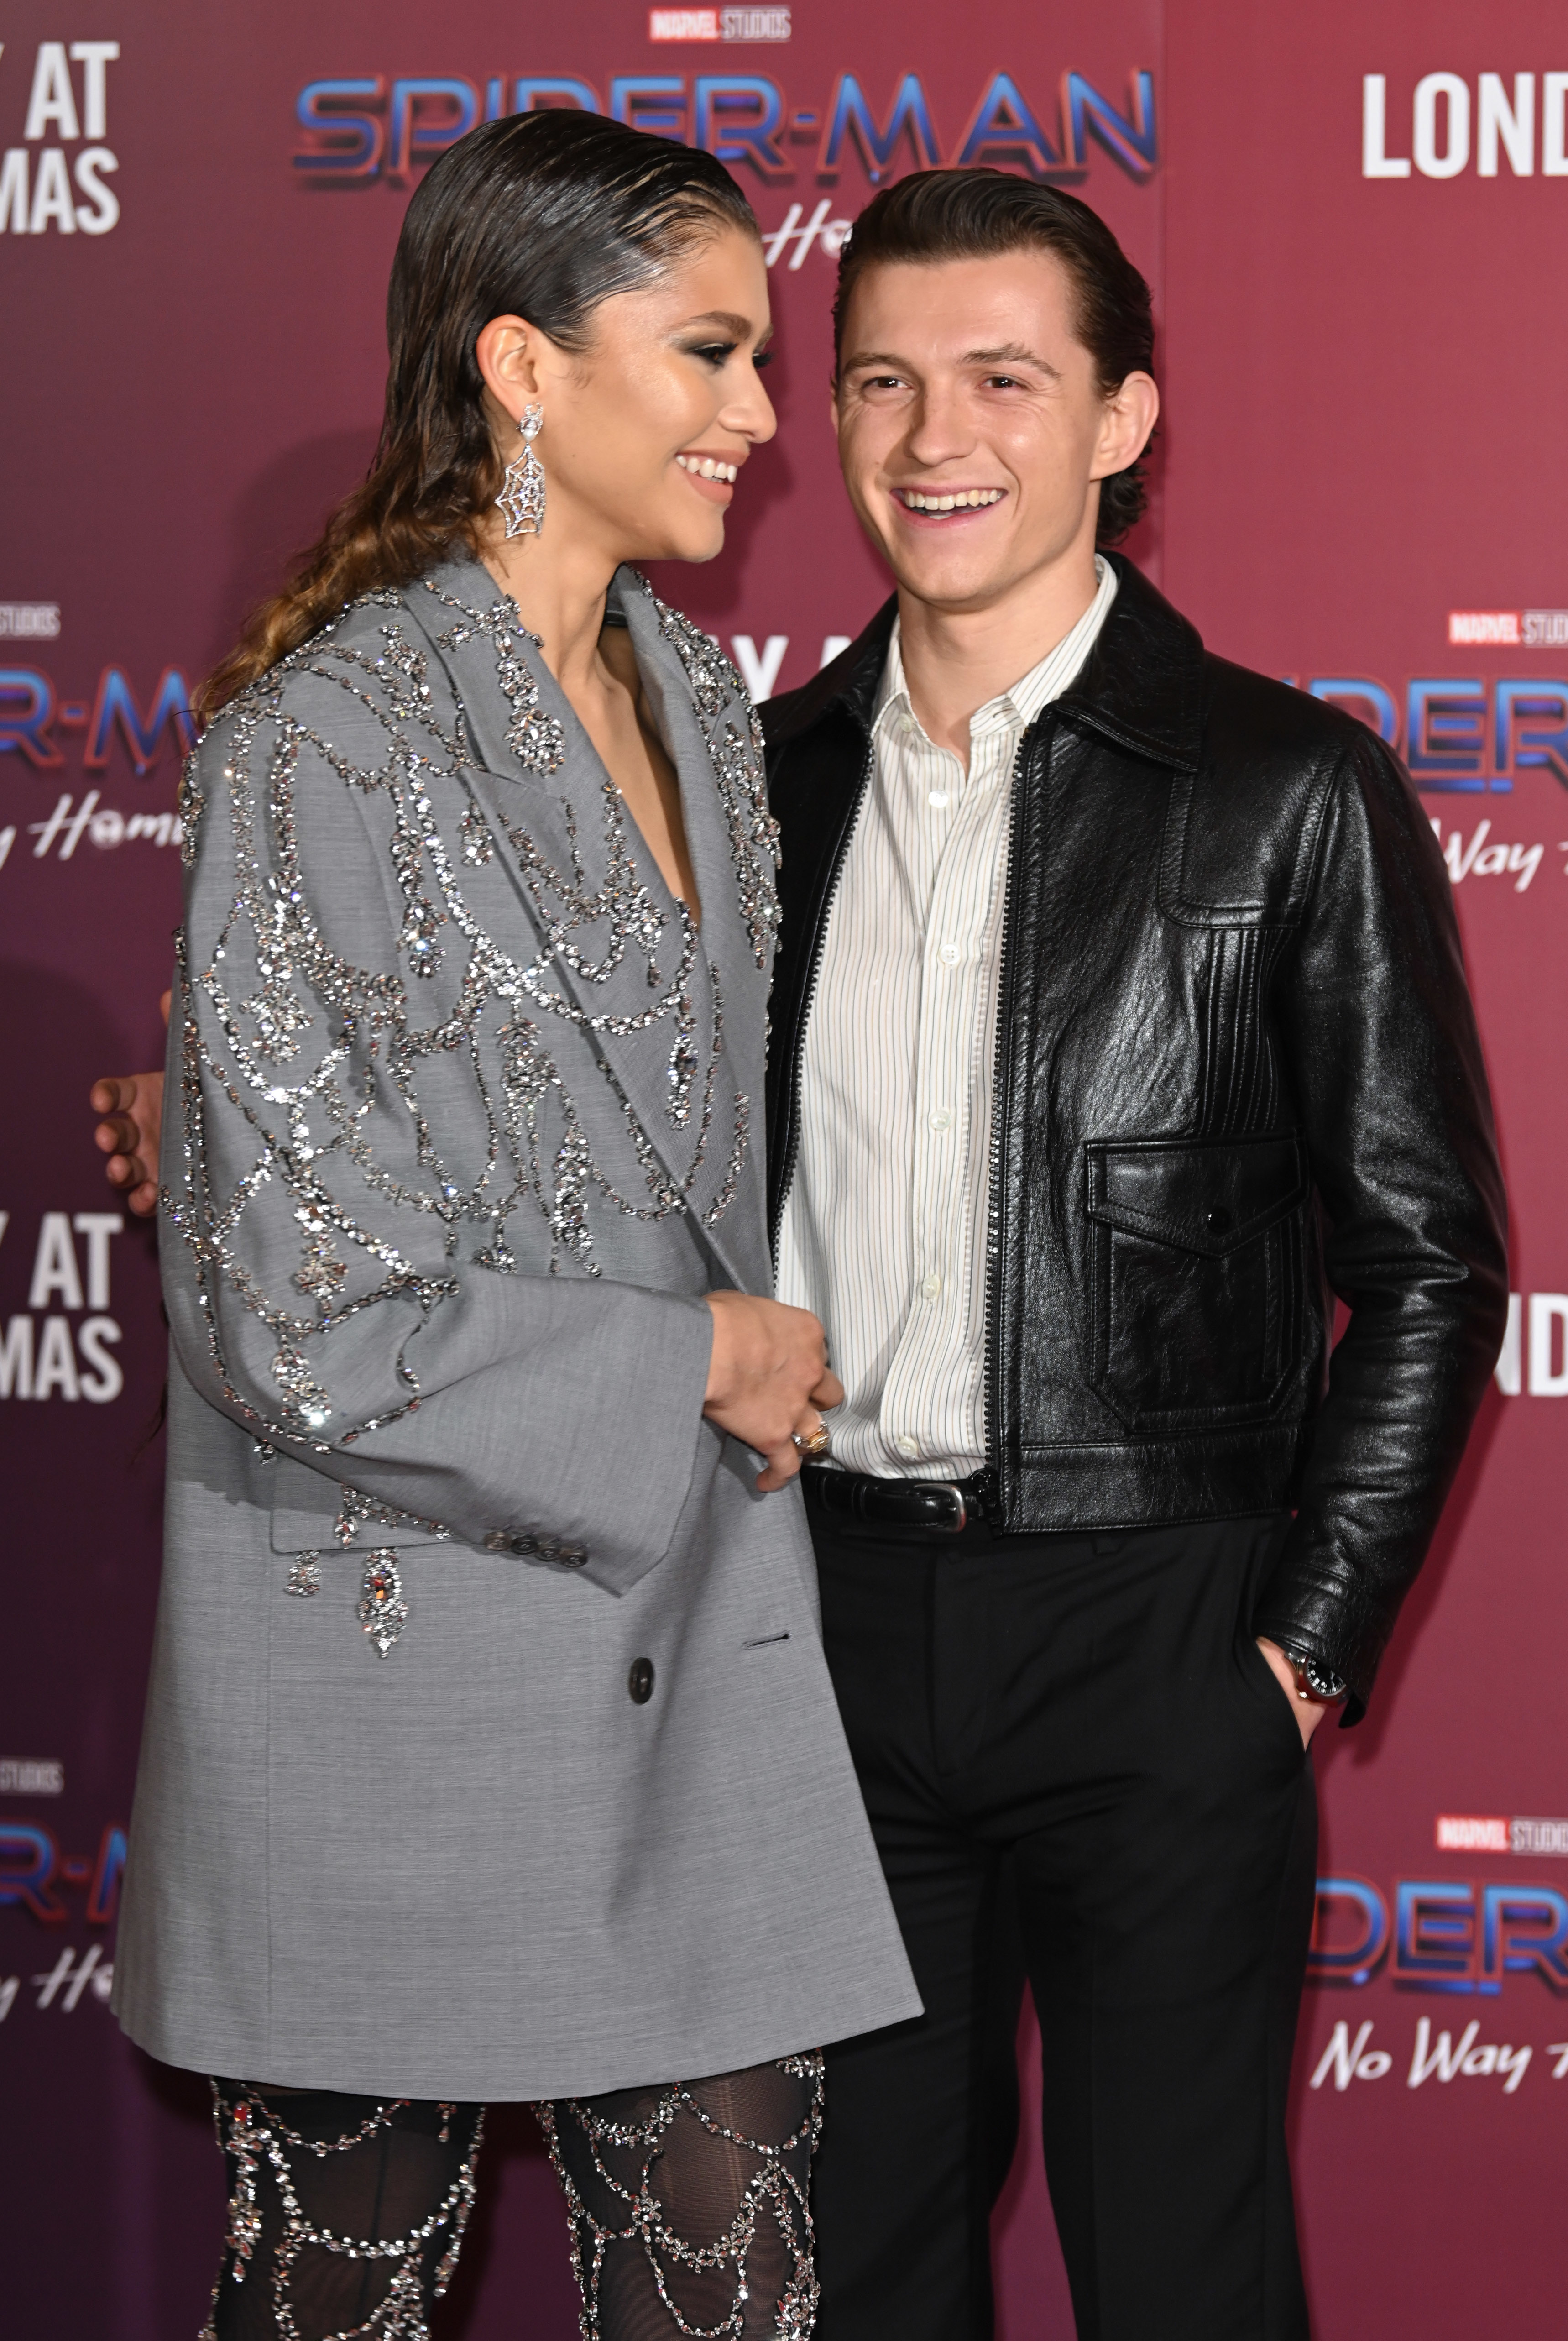 Zendaya in a long beaded suit dress and Tom in a leather jacket and striped shirt at a media event